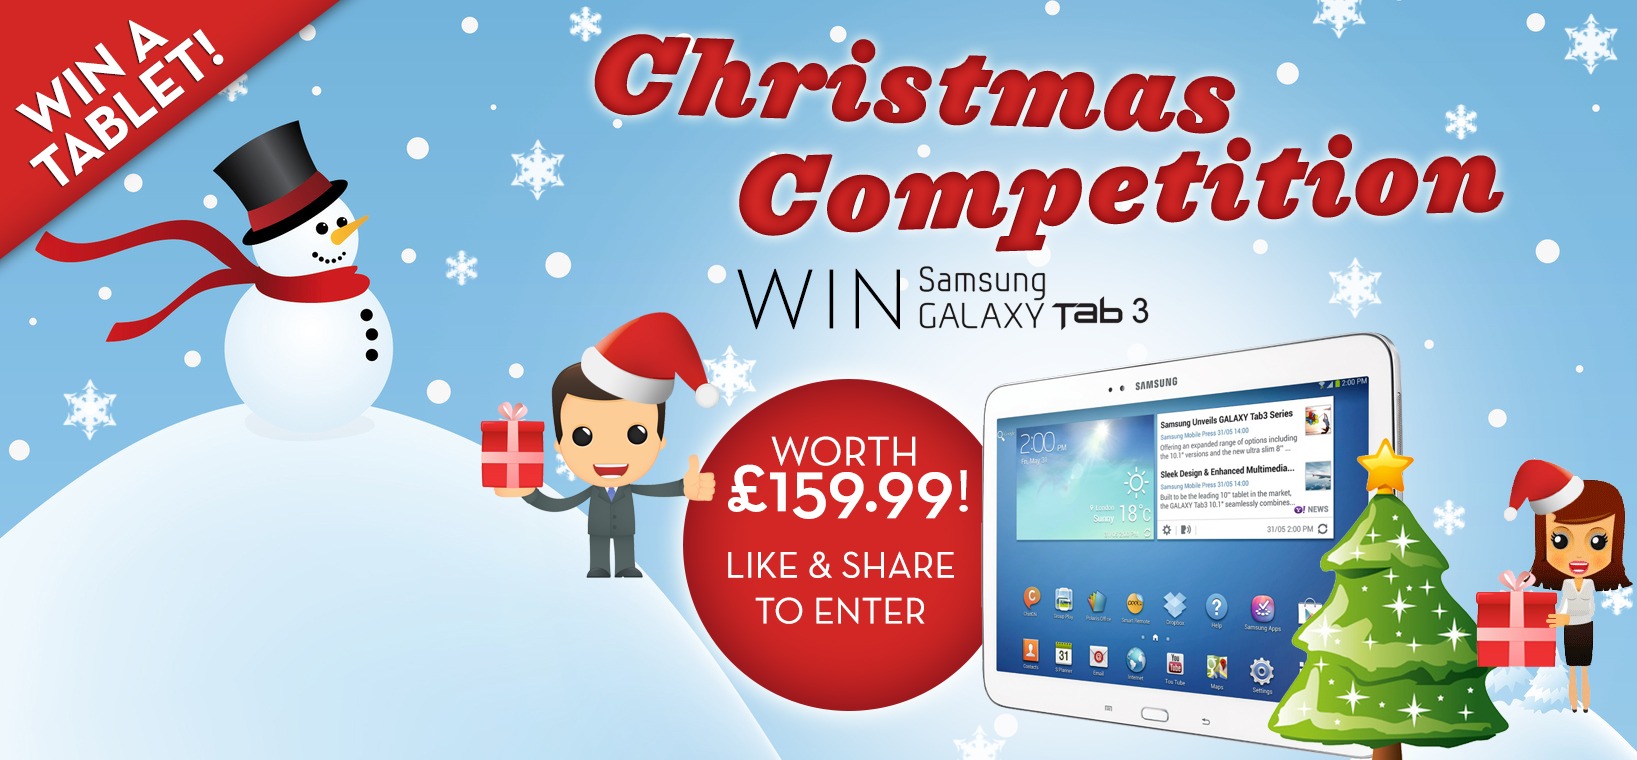 WIN! Samsung Galaxy Tab 3 Competition Crate Hire UK